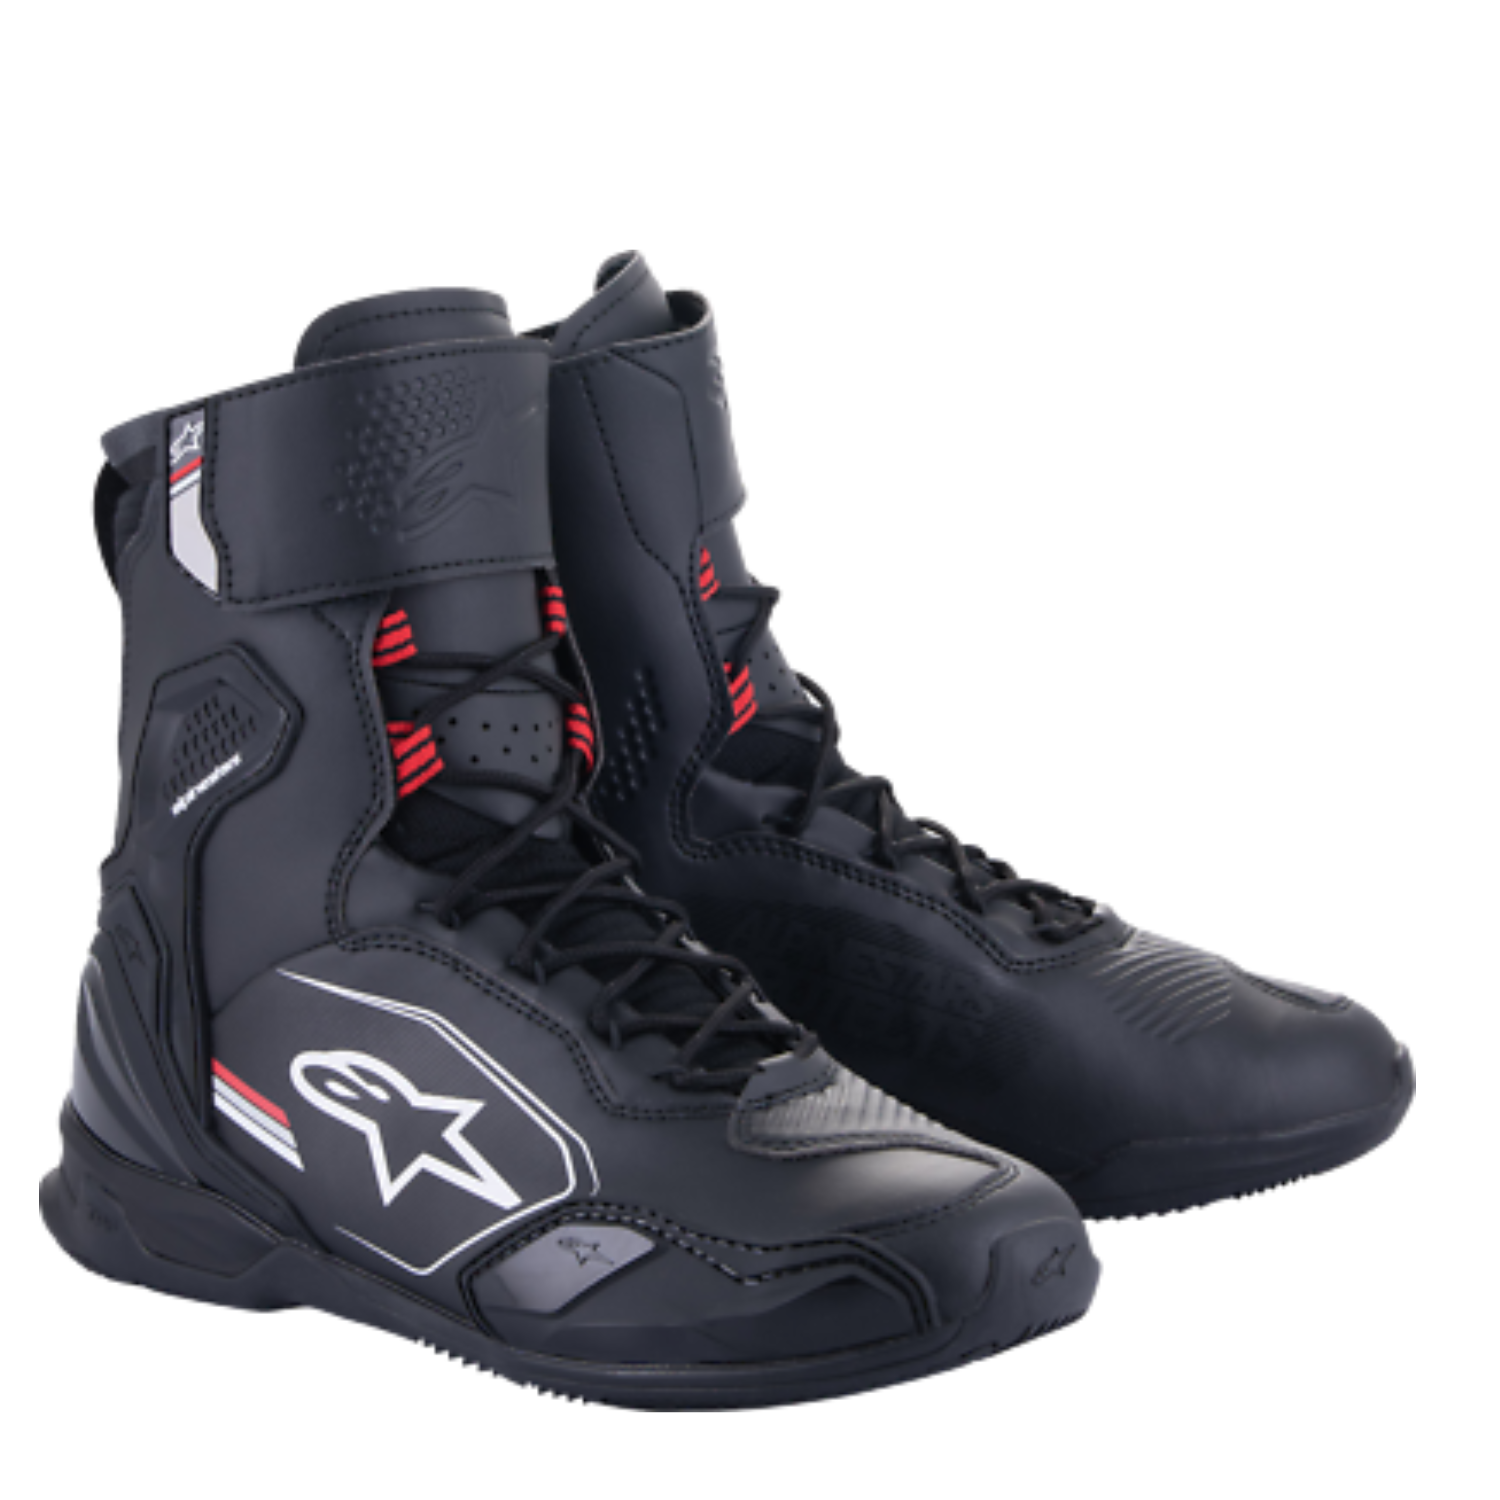 Image of EU Alpinestars Superfaster Shoes Black Gray Bright Red Taille US 13